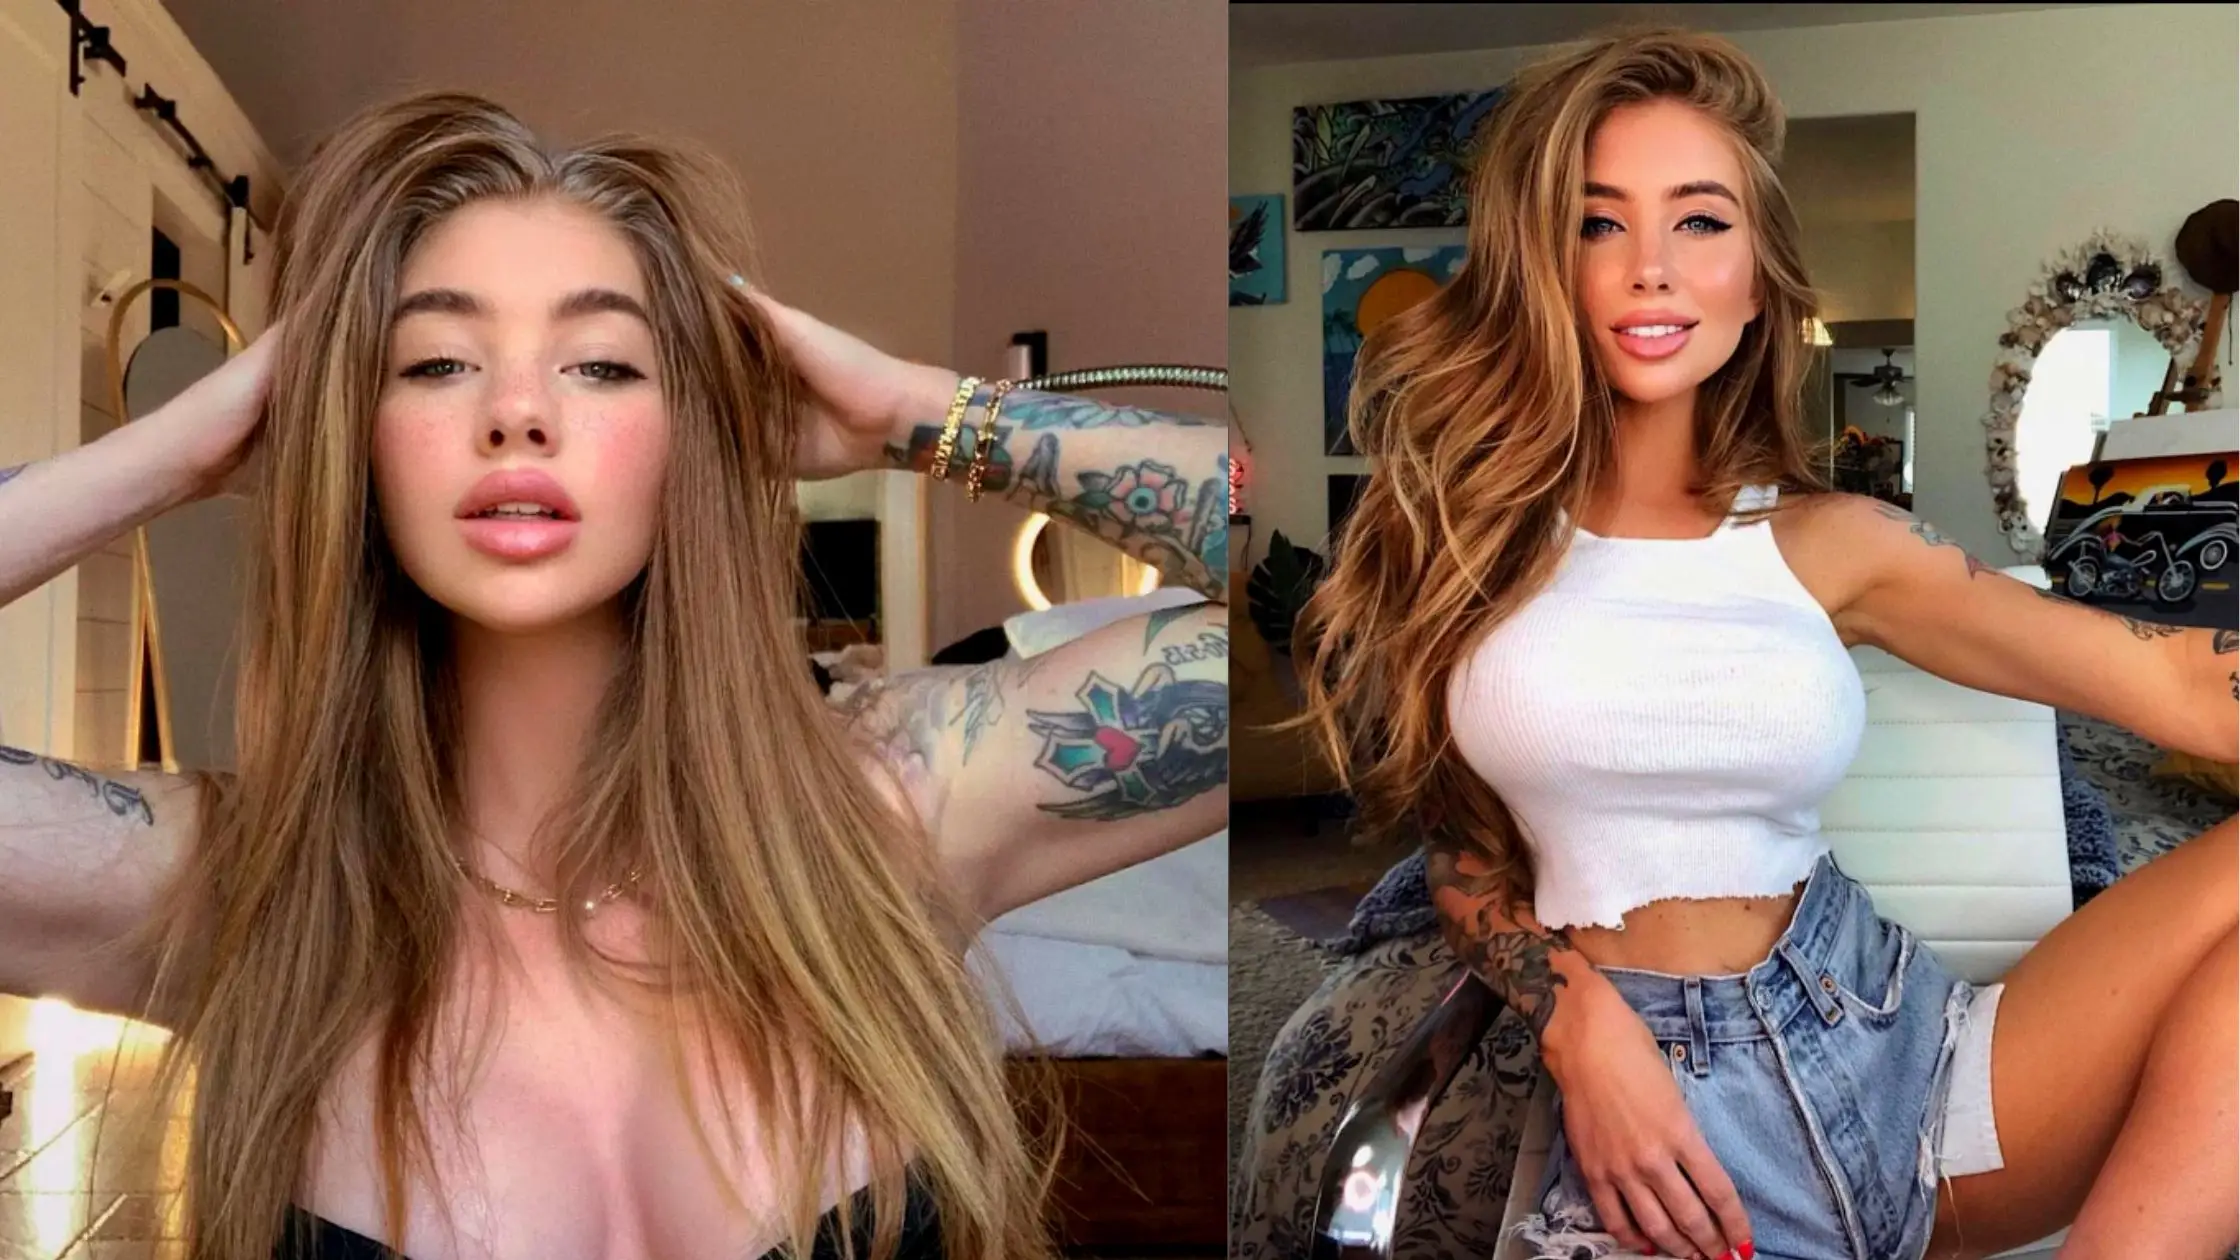 Diana Deets Suicide Creator of OnlyFans Coconut Kitty Took Her Own Life